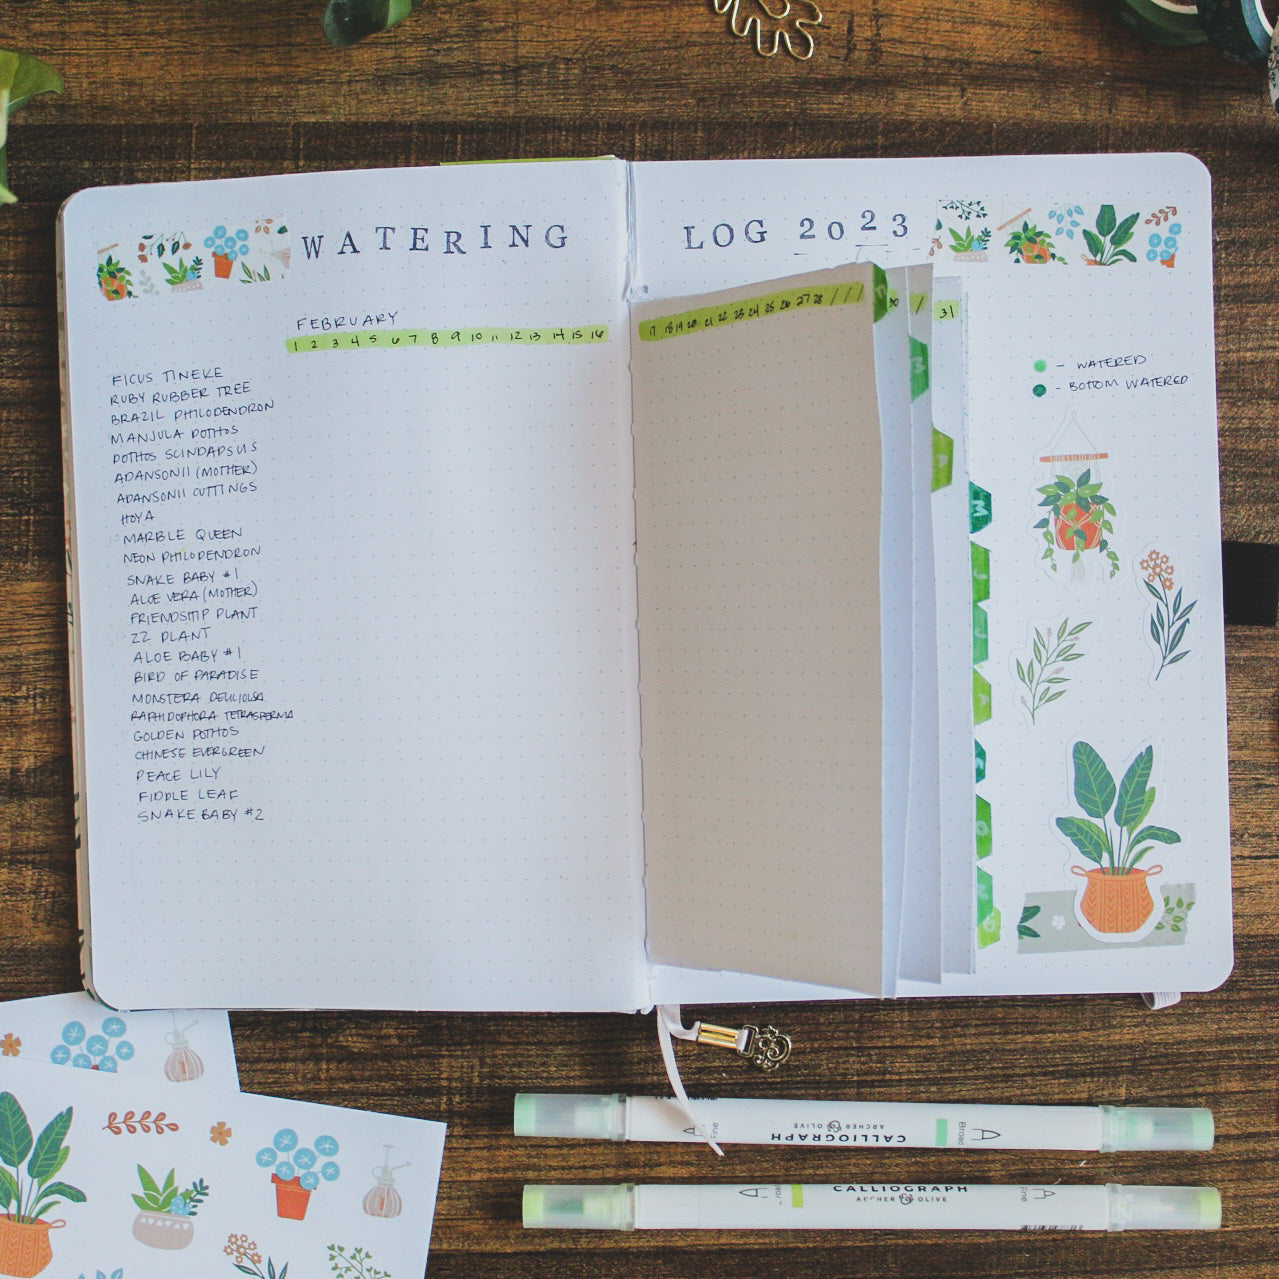 A journal is lying open on a dark desk surrounded by stationery supplies. The bullet journal spread shows a watering tracker for plant care using dutch doors.